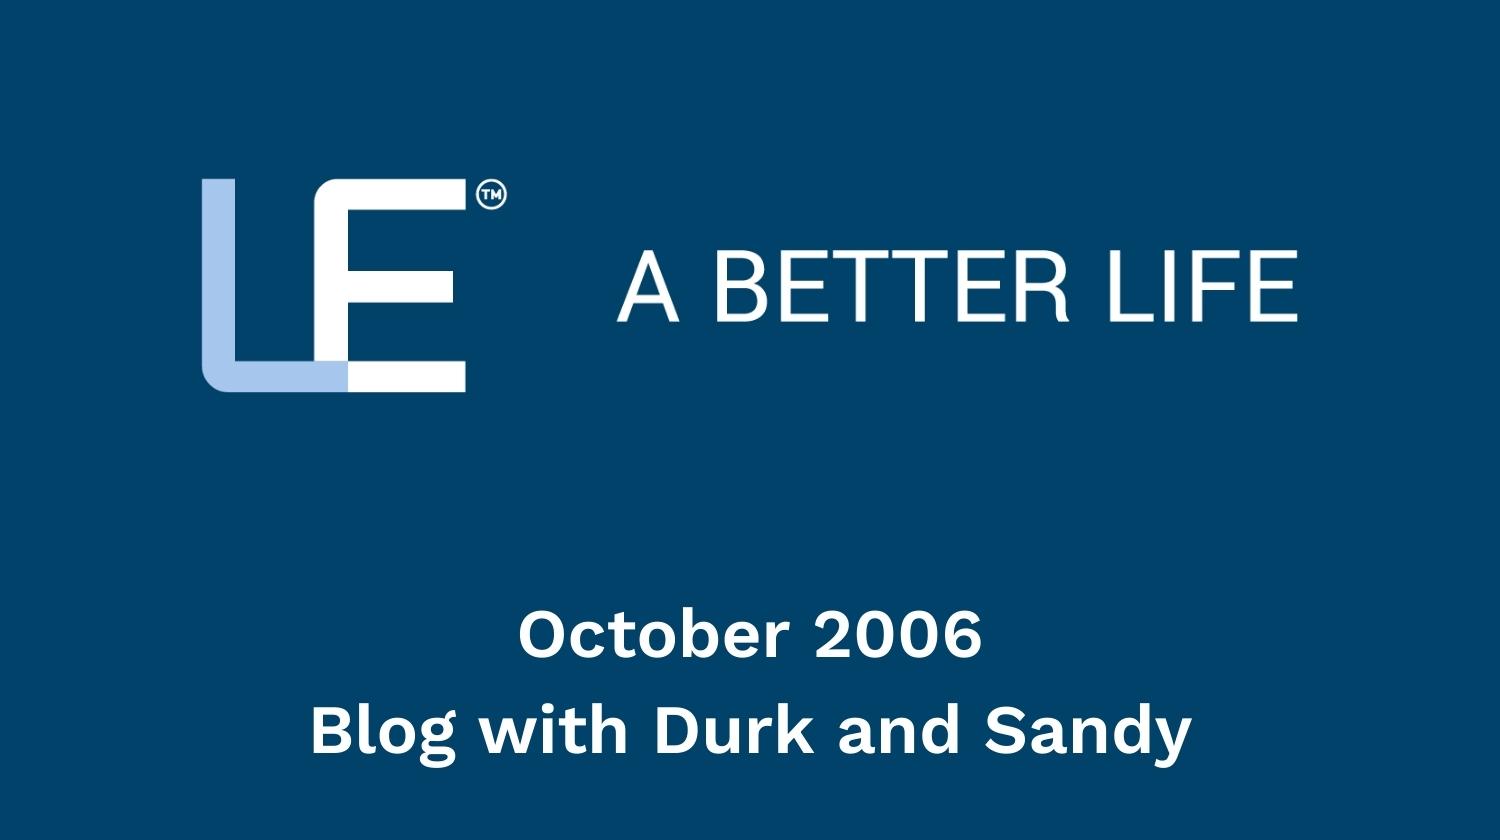 October 2006 Blog with Durk and Sandy